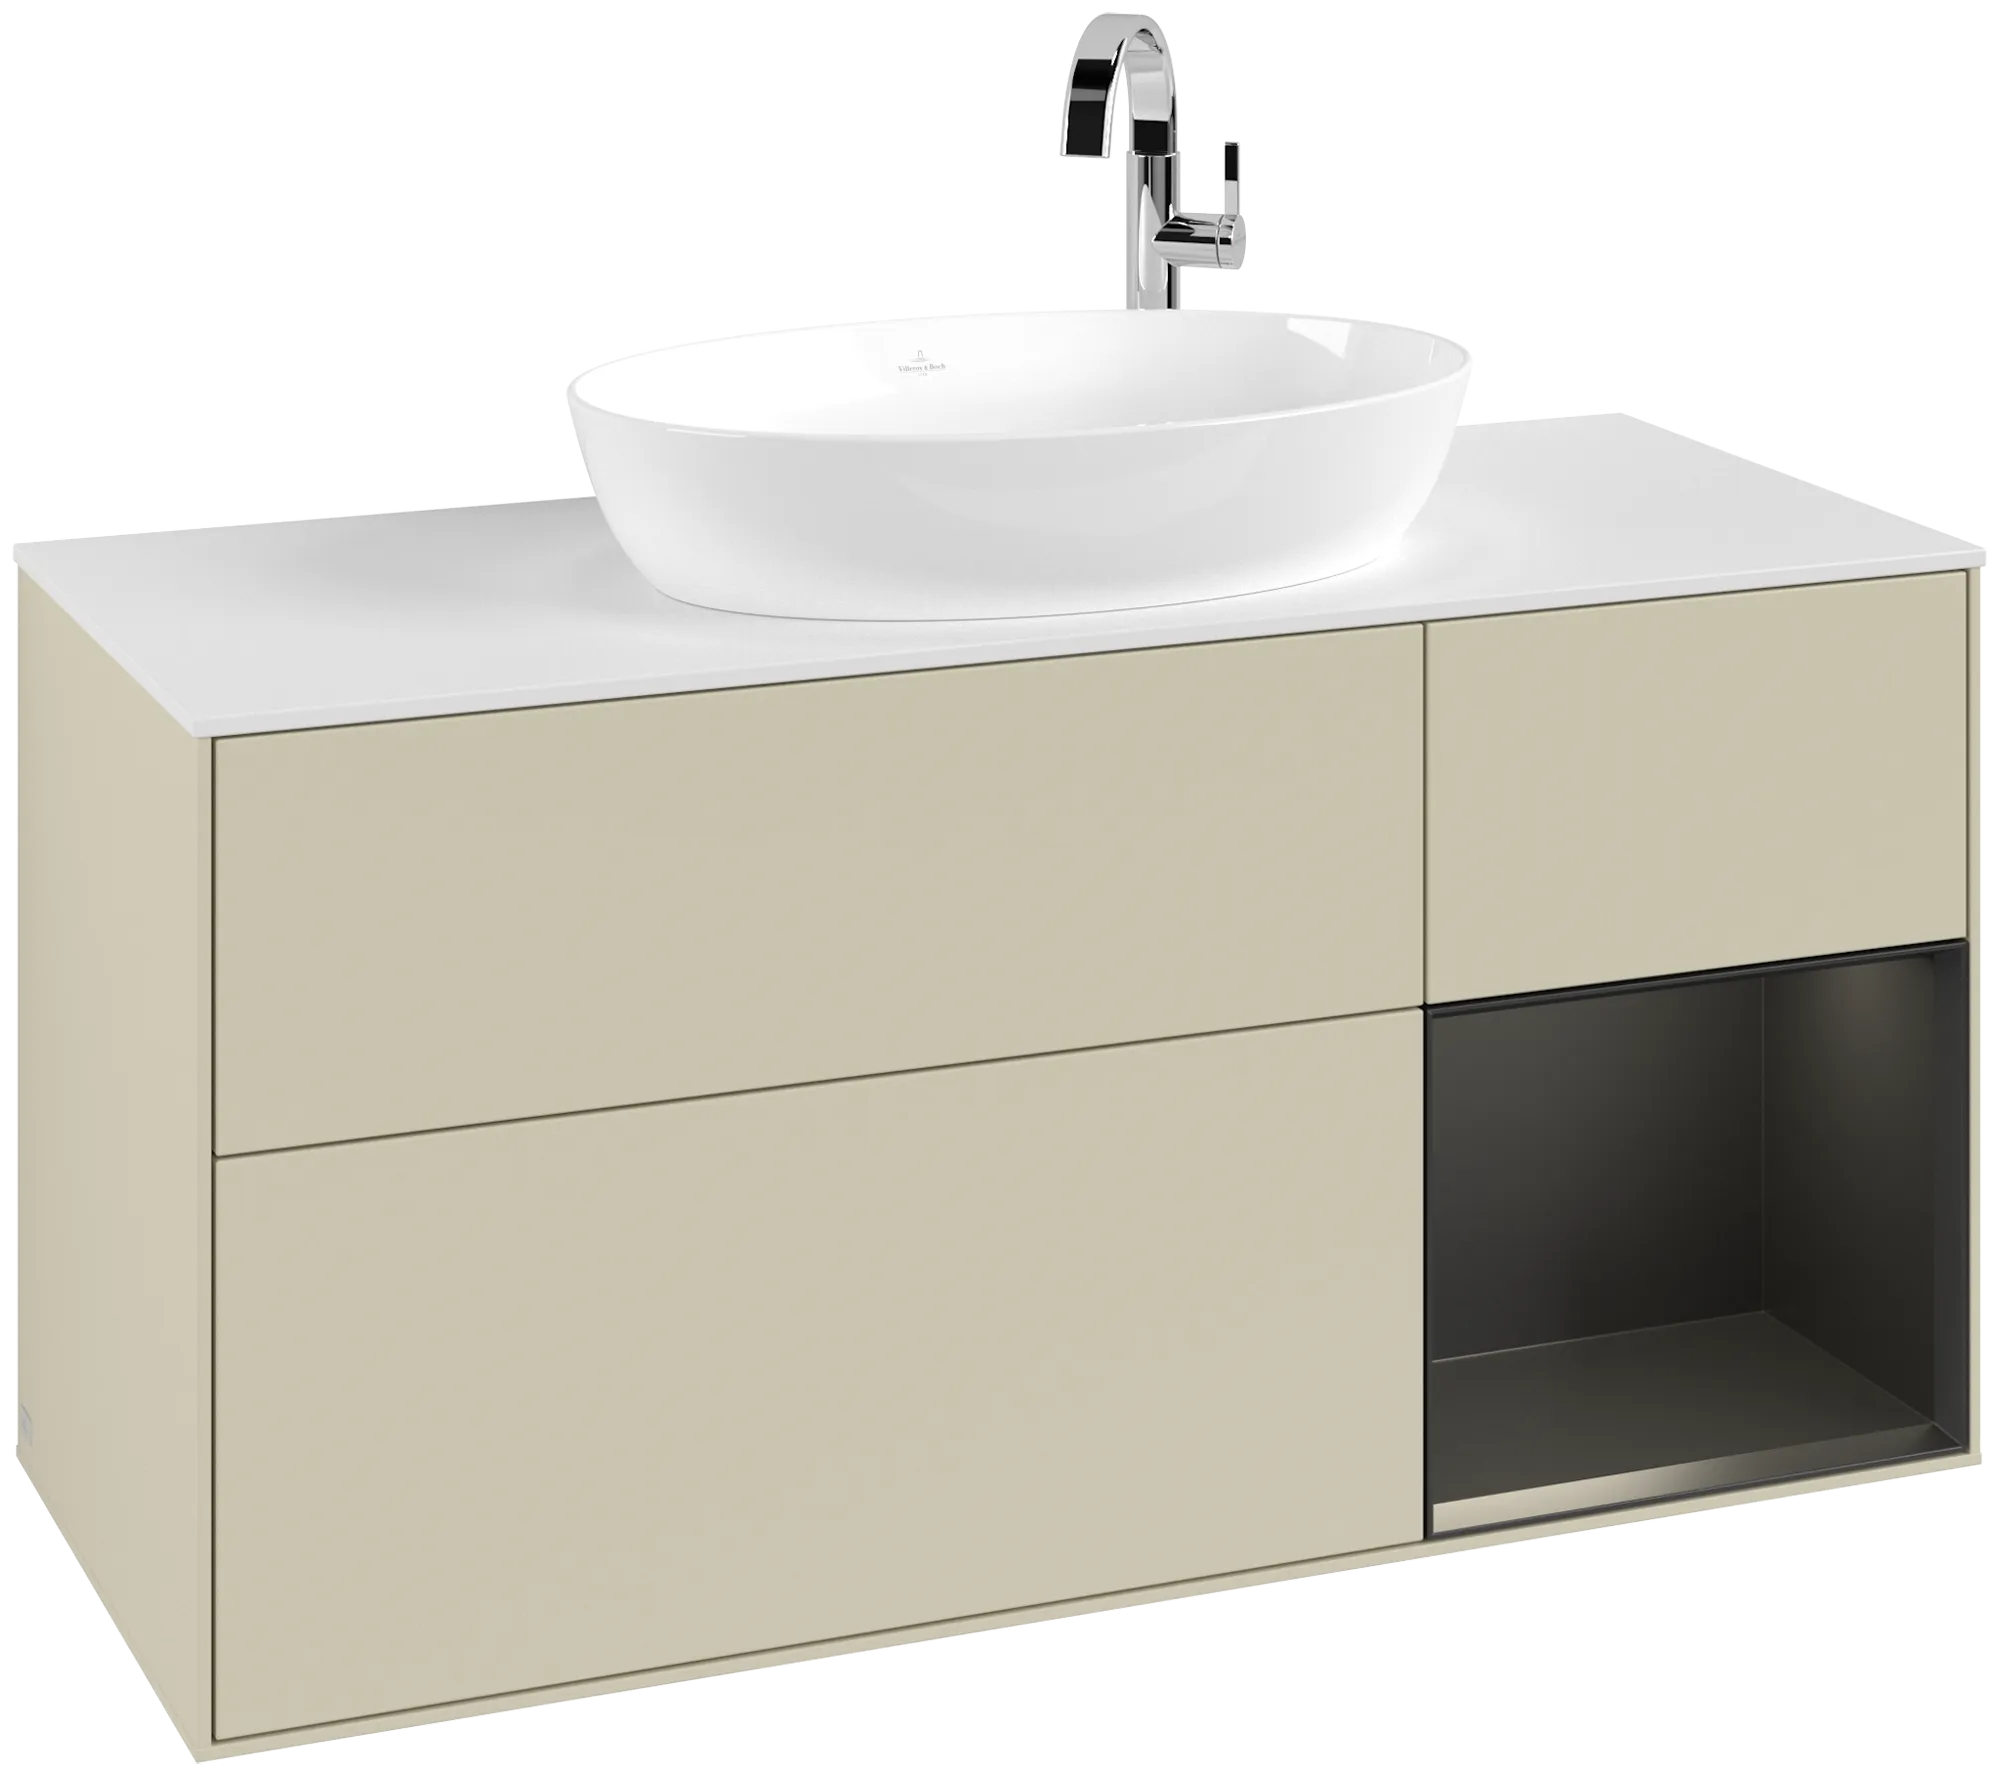 Picture of VILLEROY BOCH Finion Vanity unit, with lighting, 3 pull-out compartments, 1200 x 603 x 501 mm, Silk Grey Matt Lacquer / Black Matt Lacquer / Glass White Matt #G951PDHJ